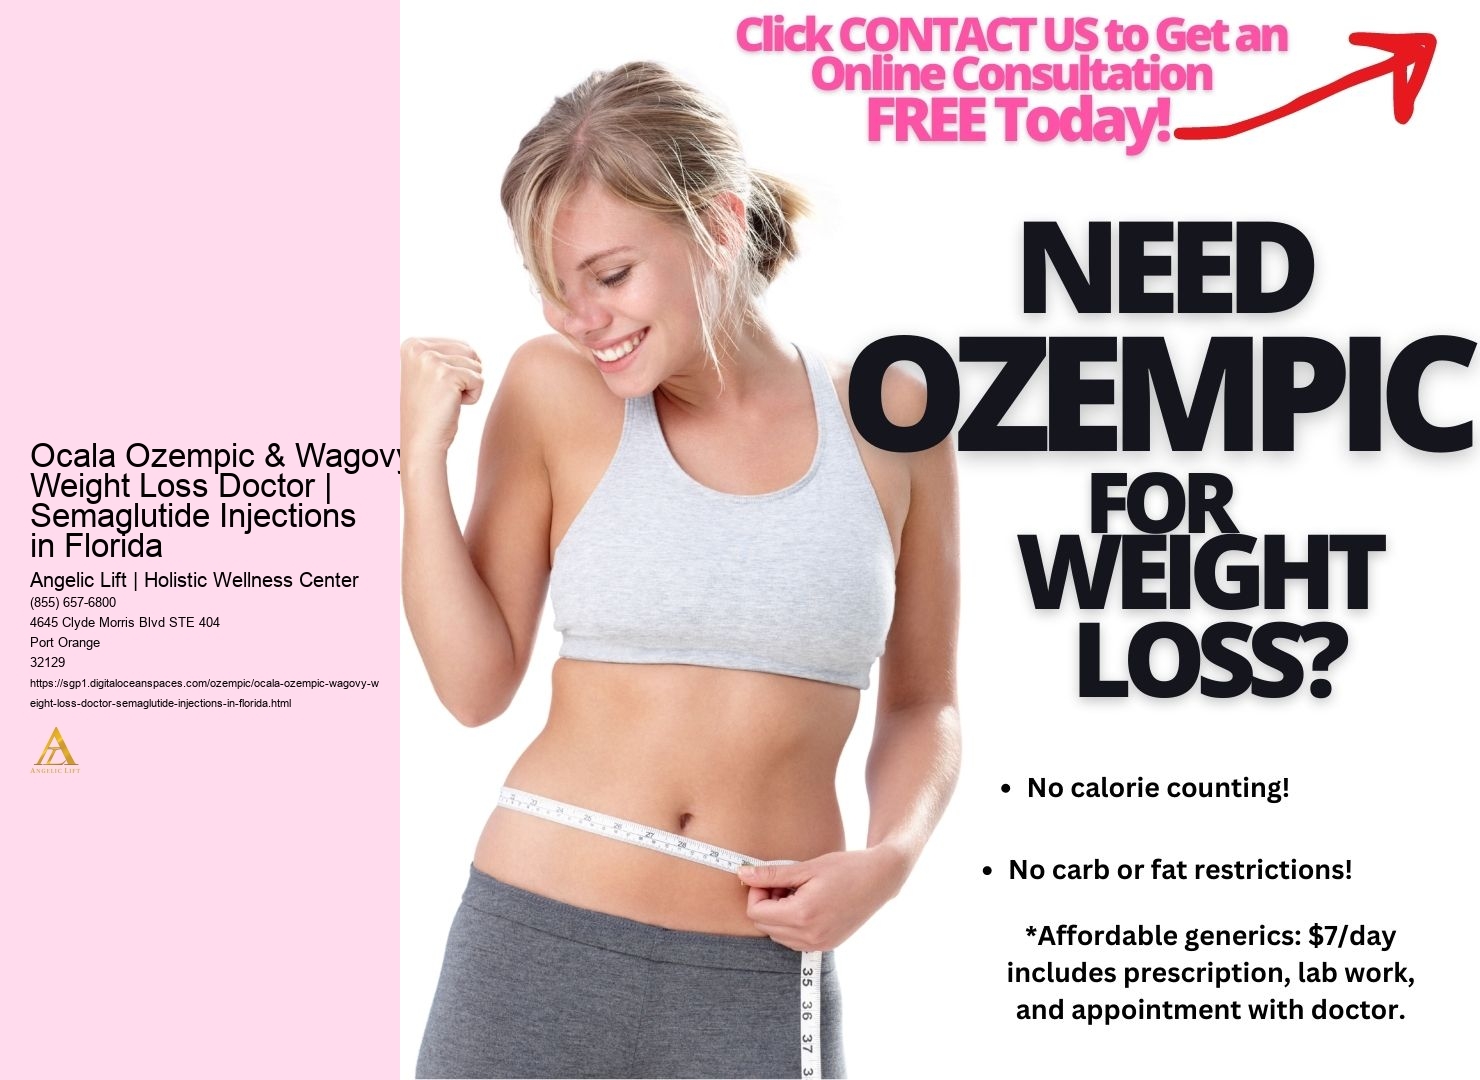 Ocala Ozempic & Wagovy Weight Loss Doctor | Semaglutide Injections in Florida